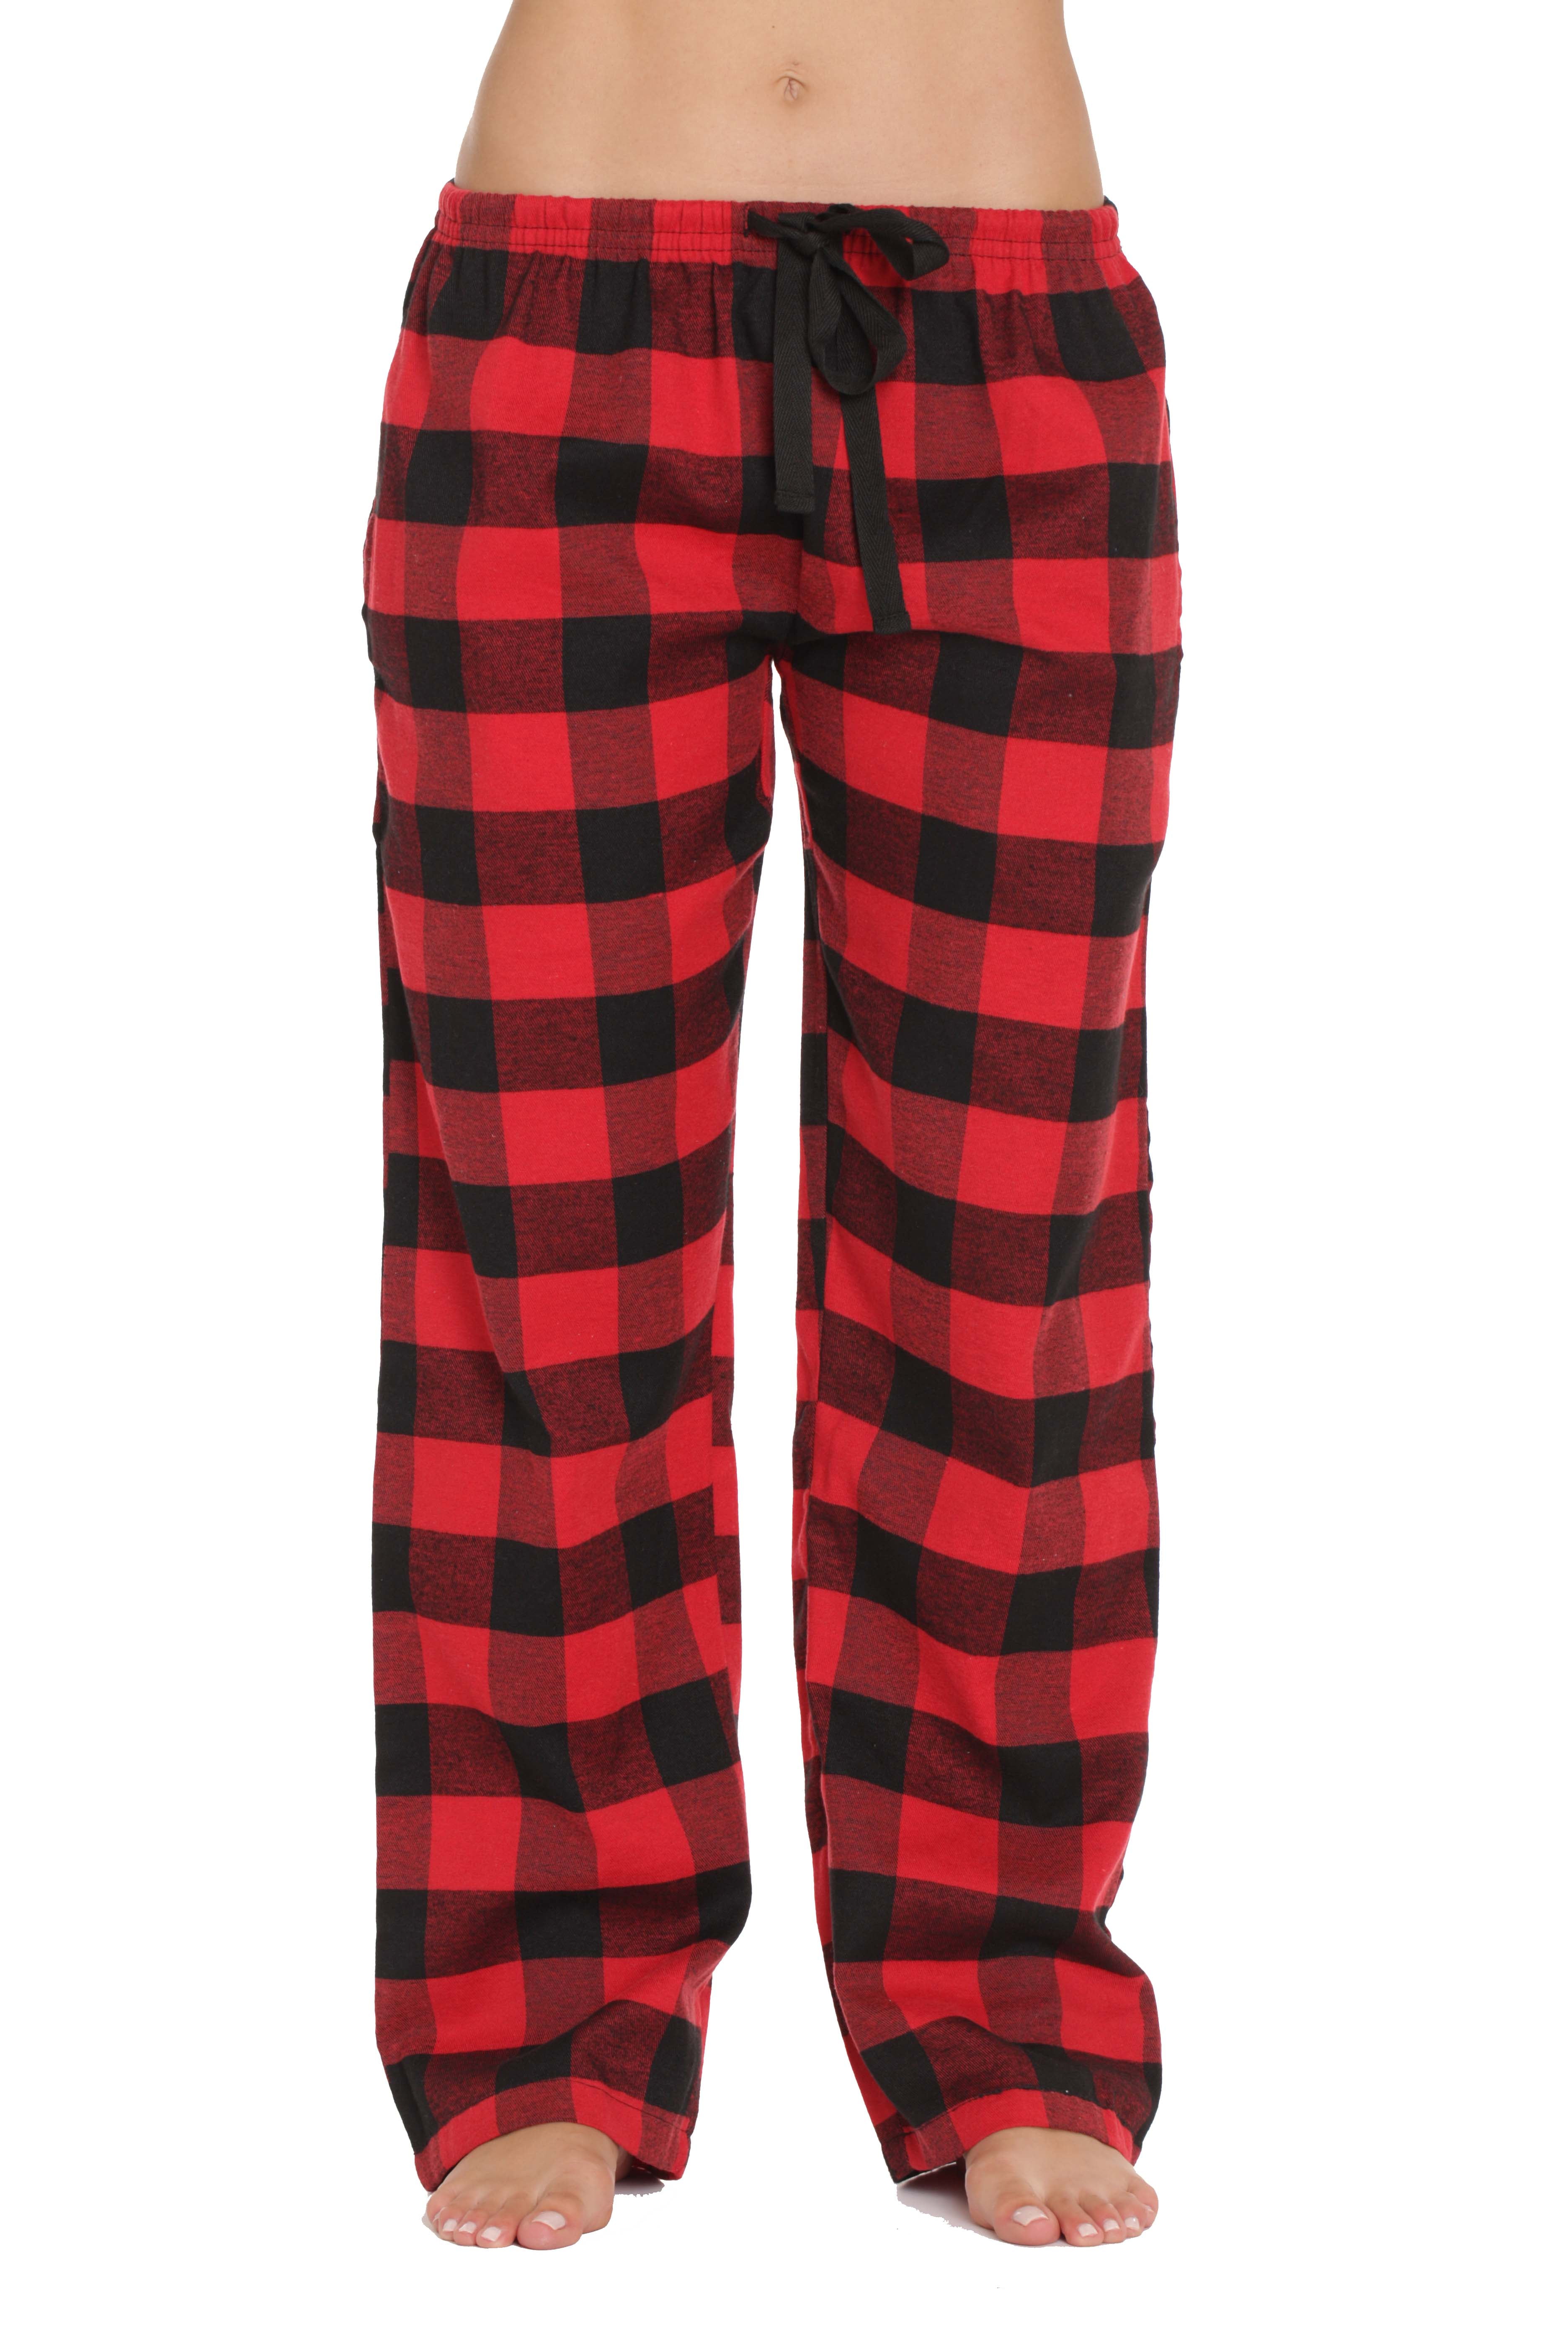 followme Flannel Pajama Pants for Women Sleepwear PJs 45805-10195-RED-S :  : Clothing, Shoes & Accessories